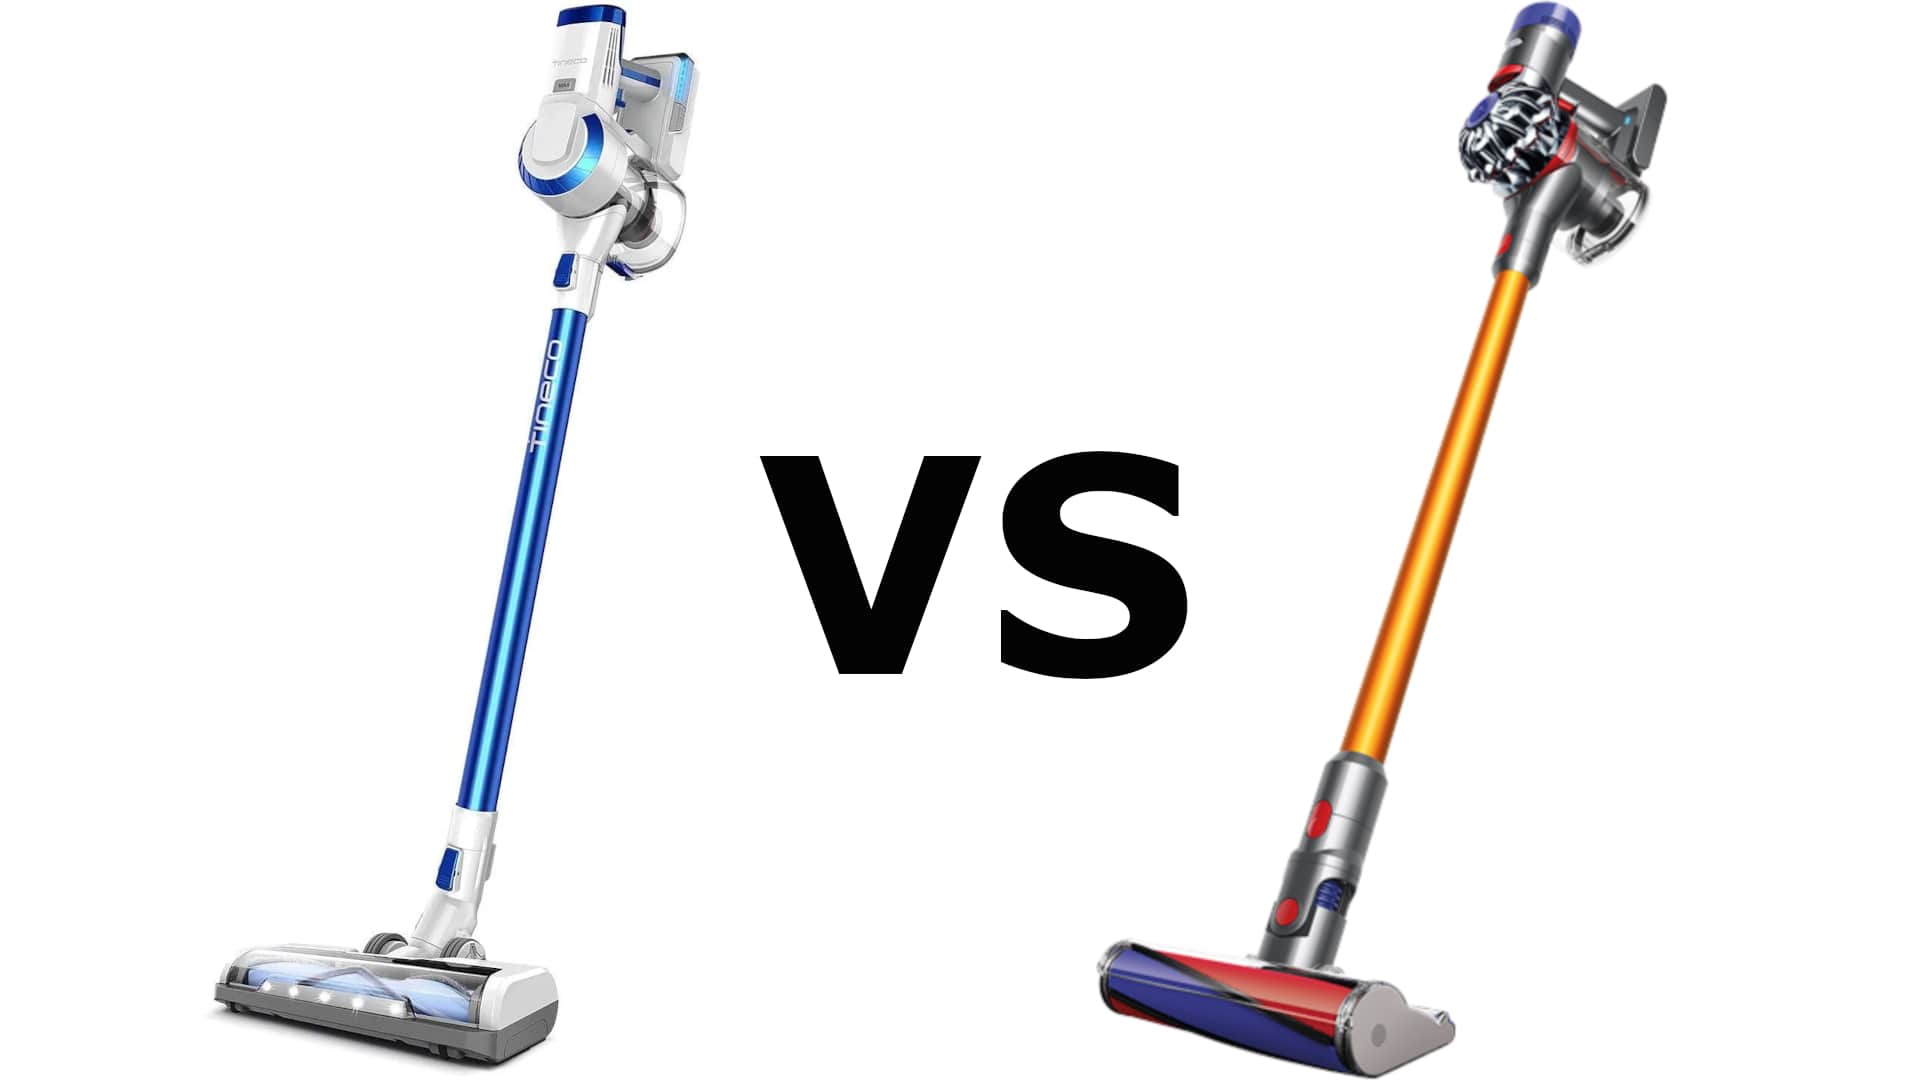 You are currently viewing TINECO A10 Hero VS DYSON V8 Comparison